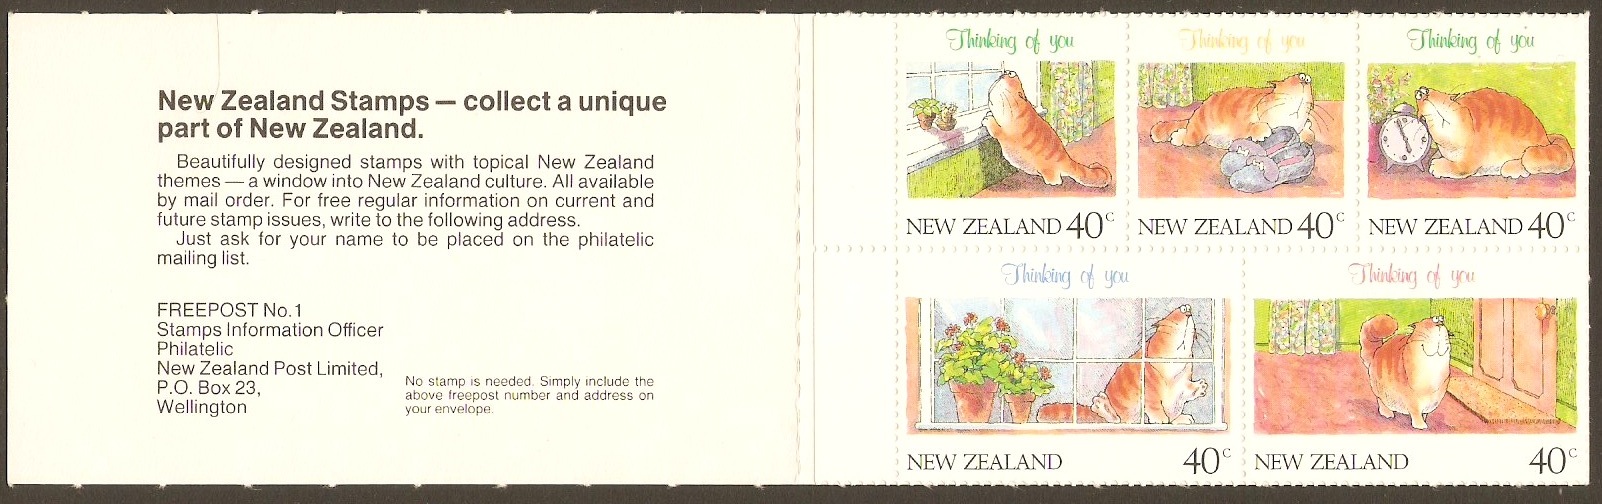 New Zealand 1991 40c "Thinking of You" Stamp booklet. SG1604-SG1